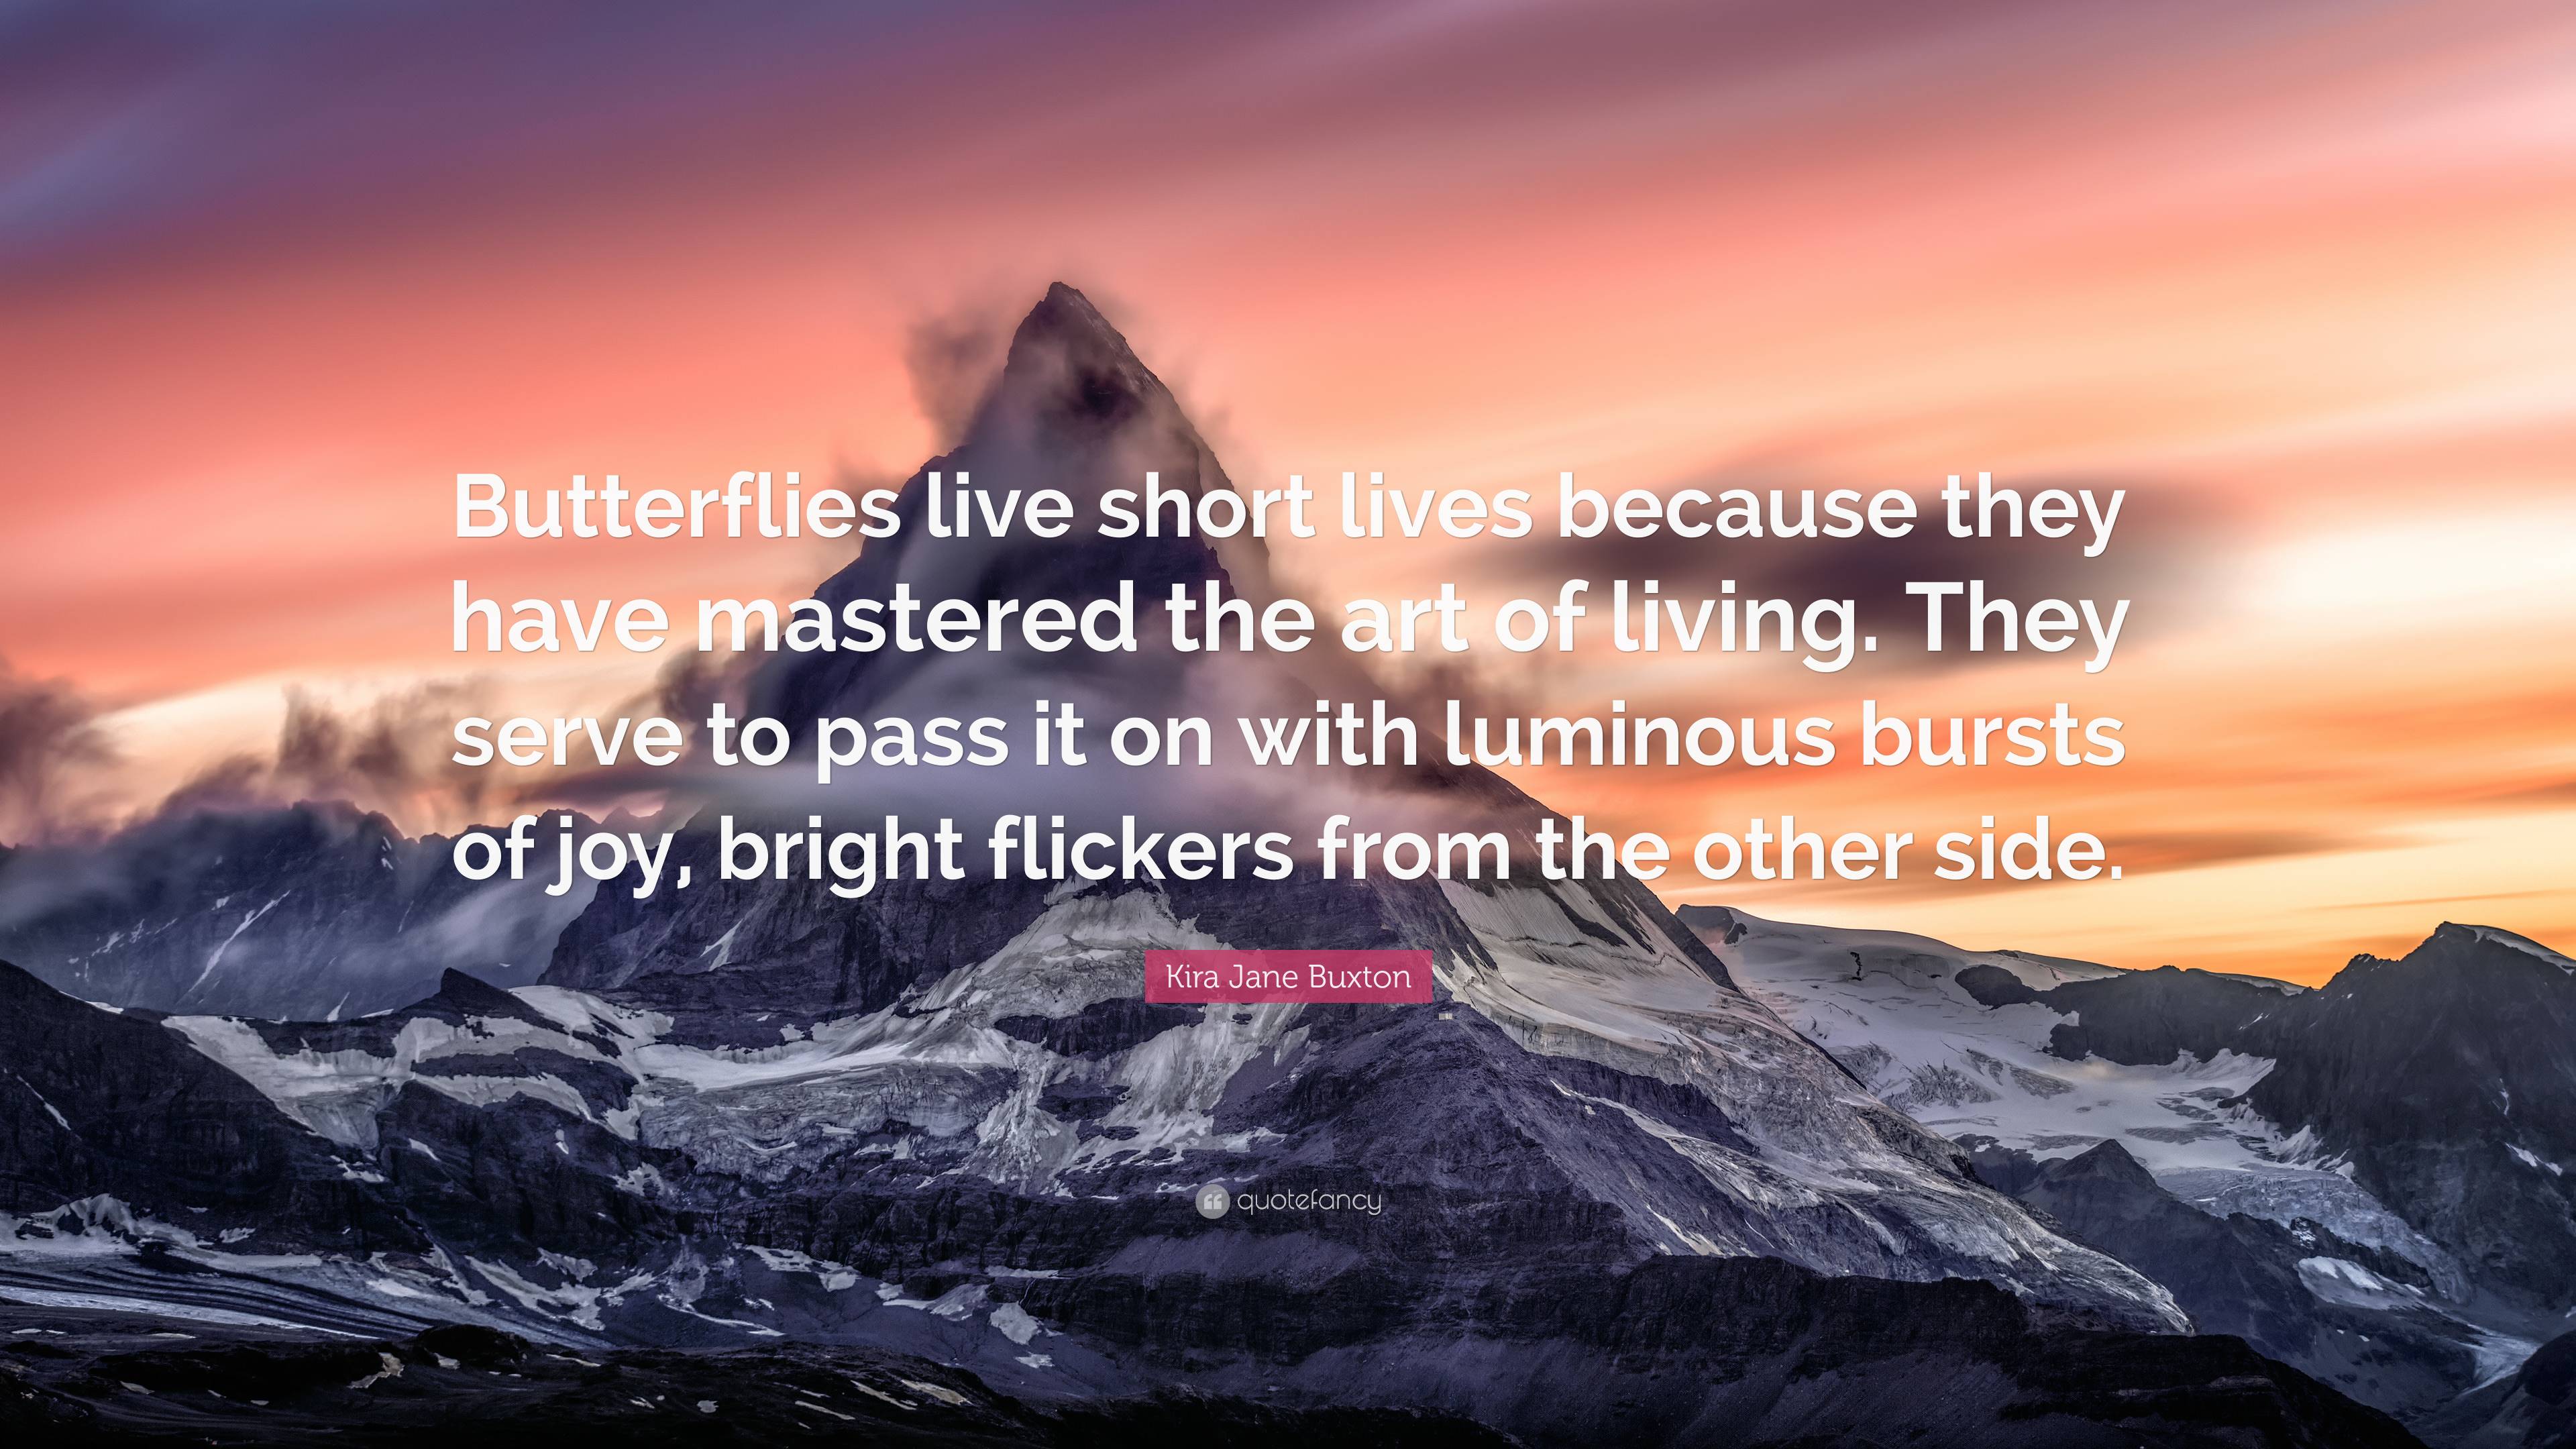 Kira Jane Buxton Quote: “Butterflies live short lives because they